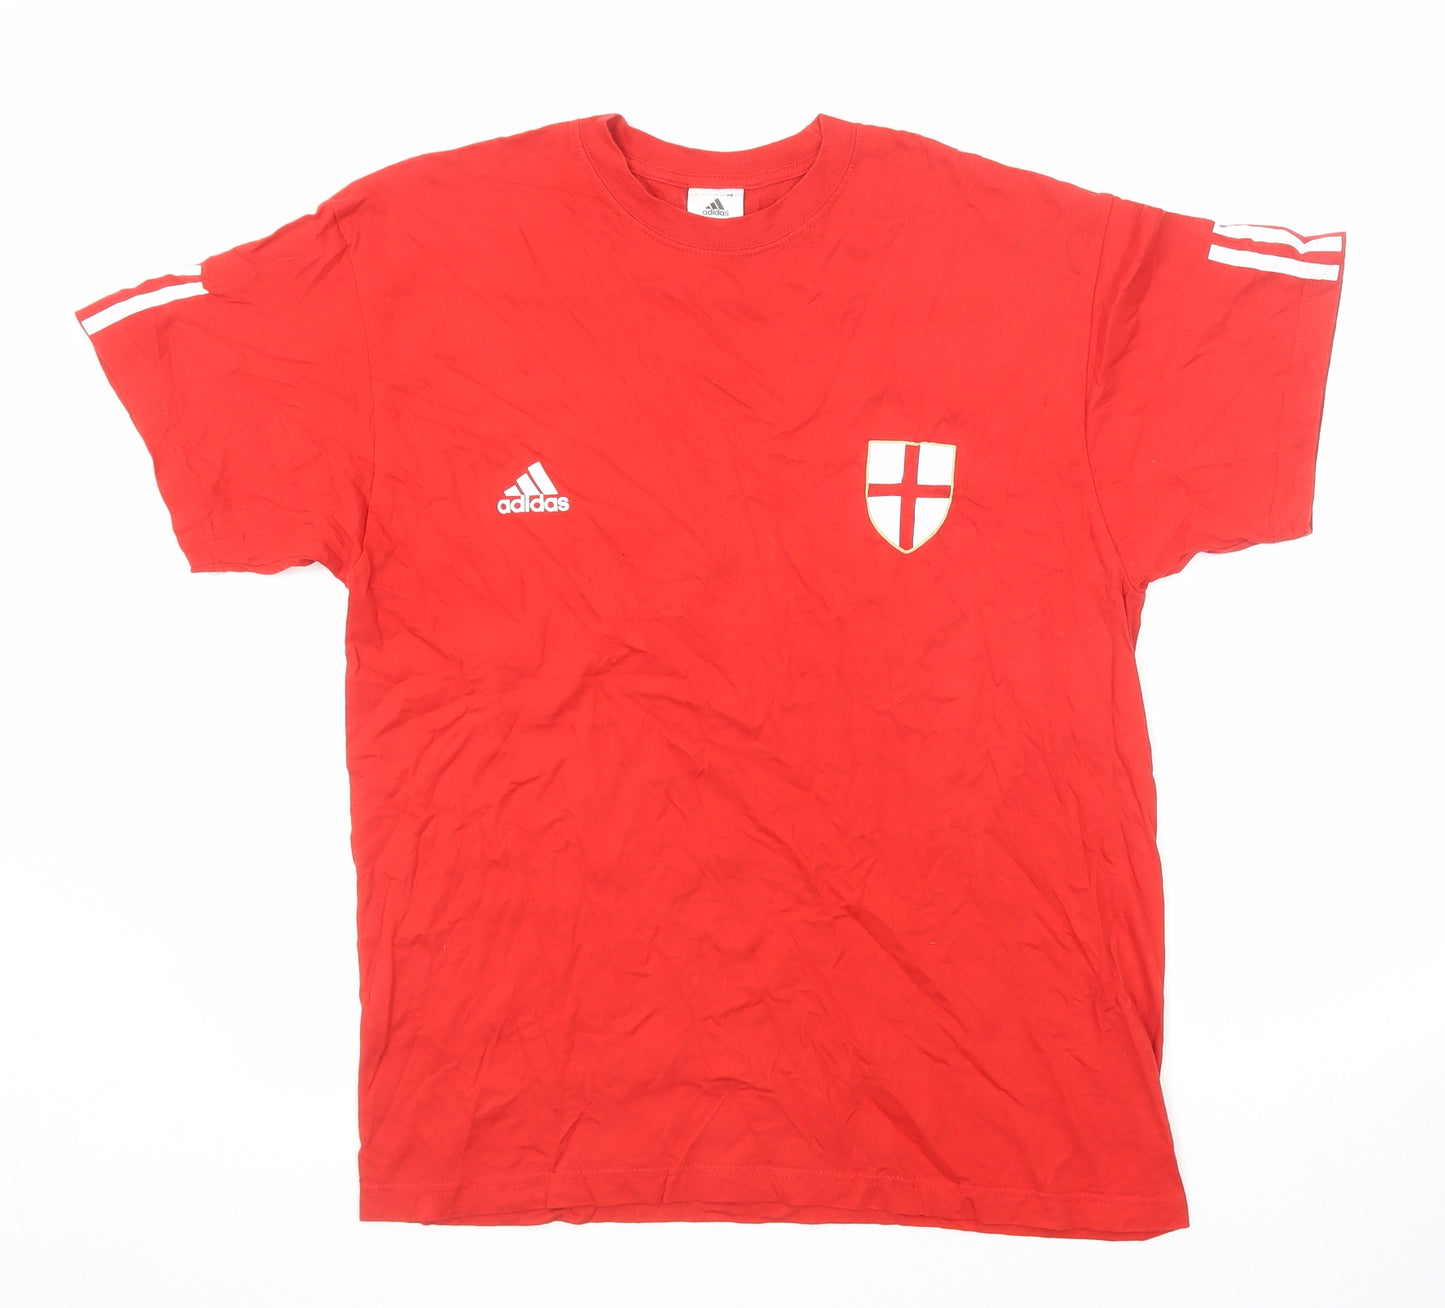 adidas Mens Red Cotton T-Shirt Size L Round Neck - England